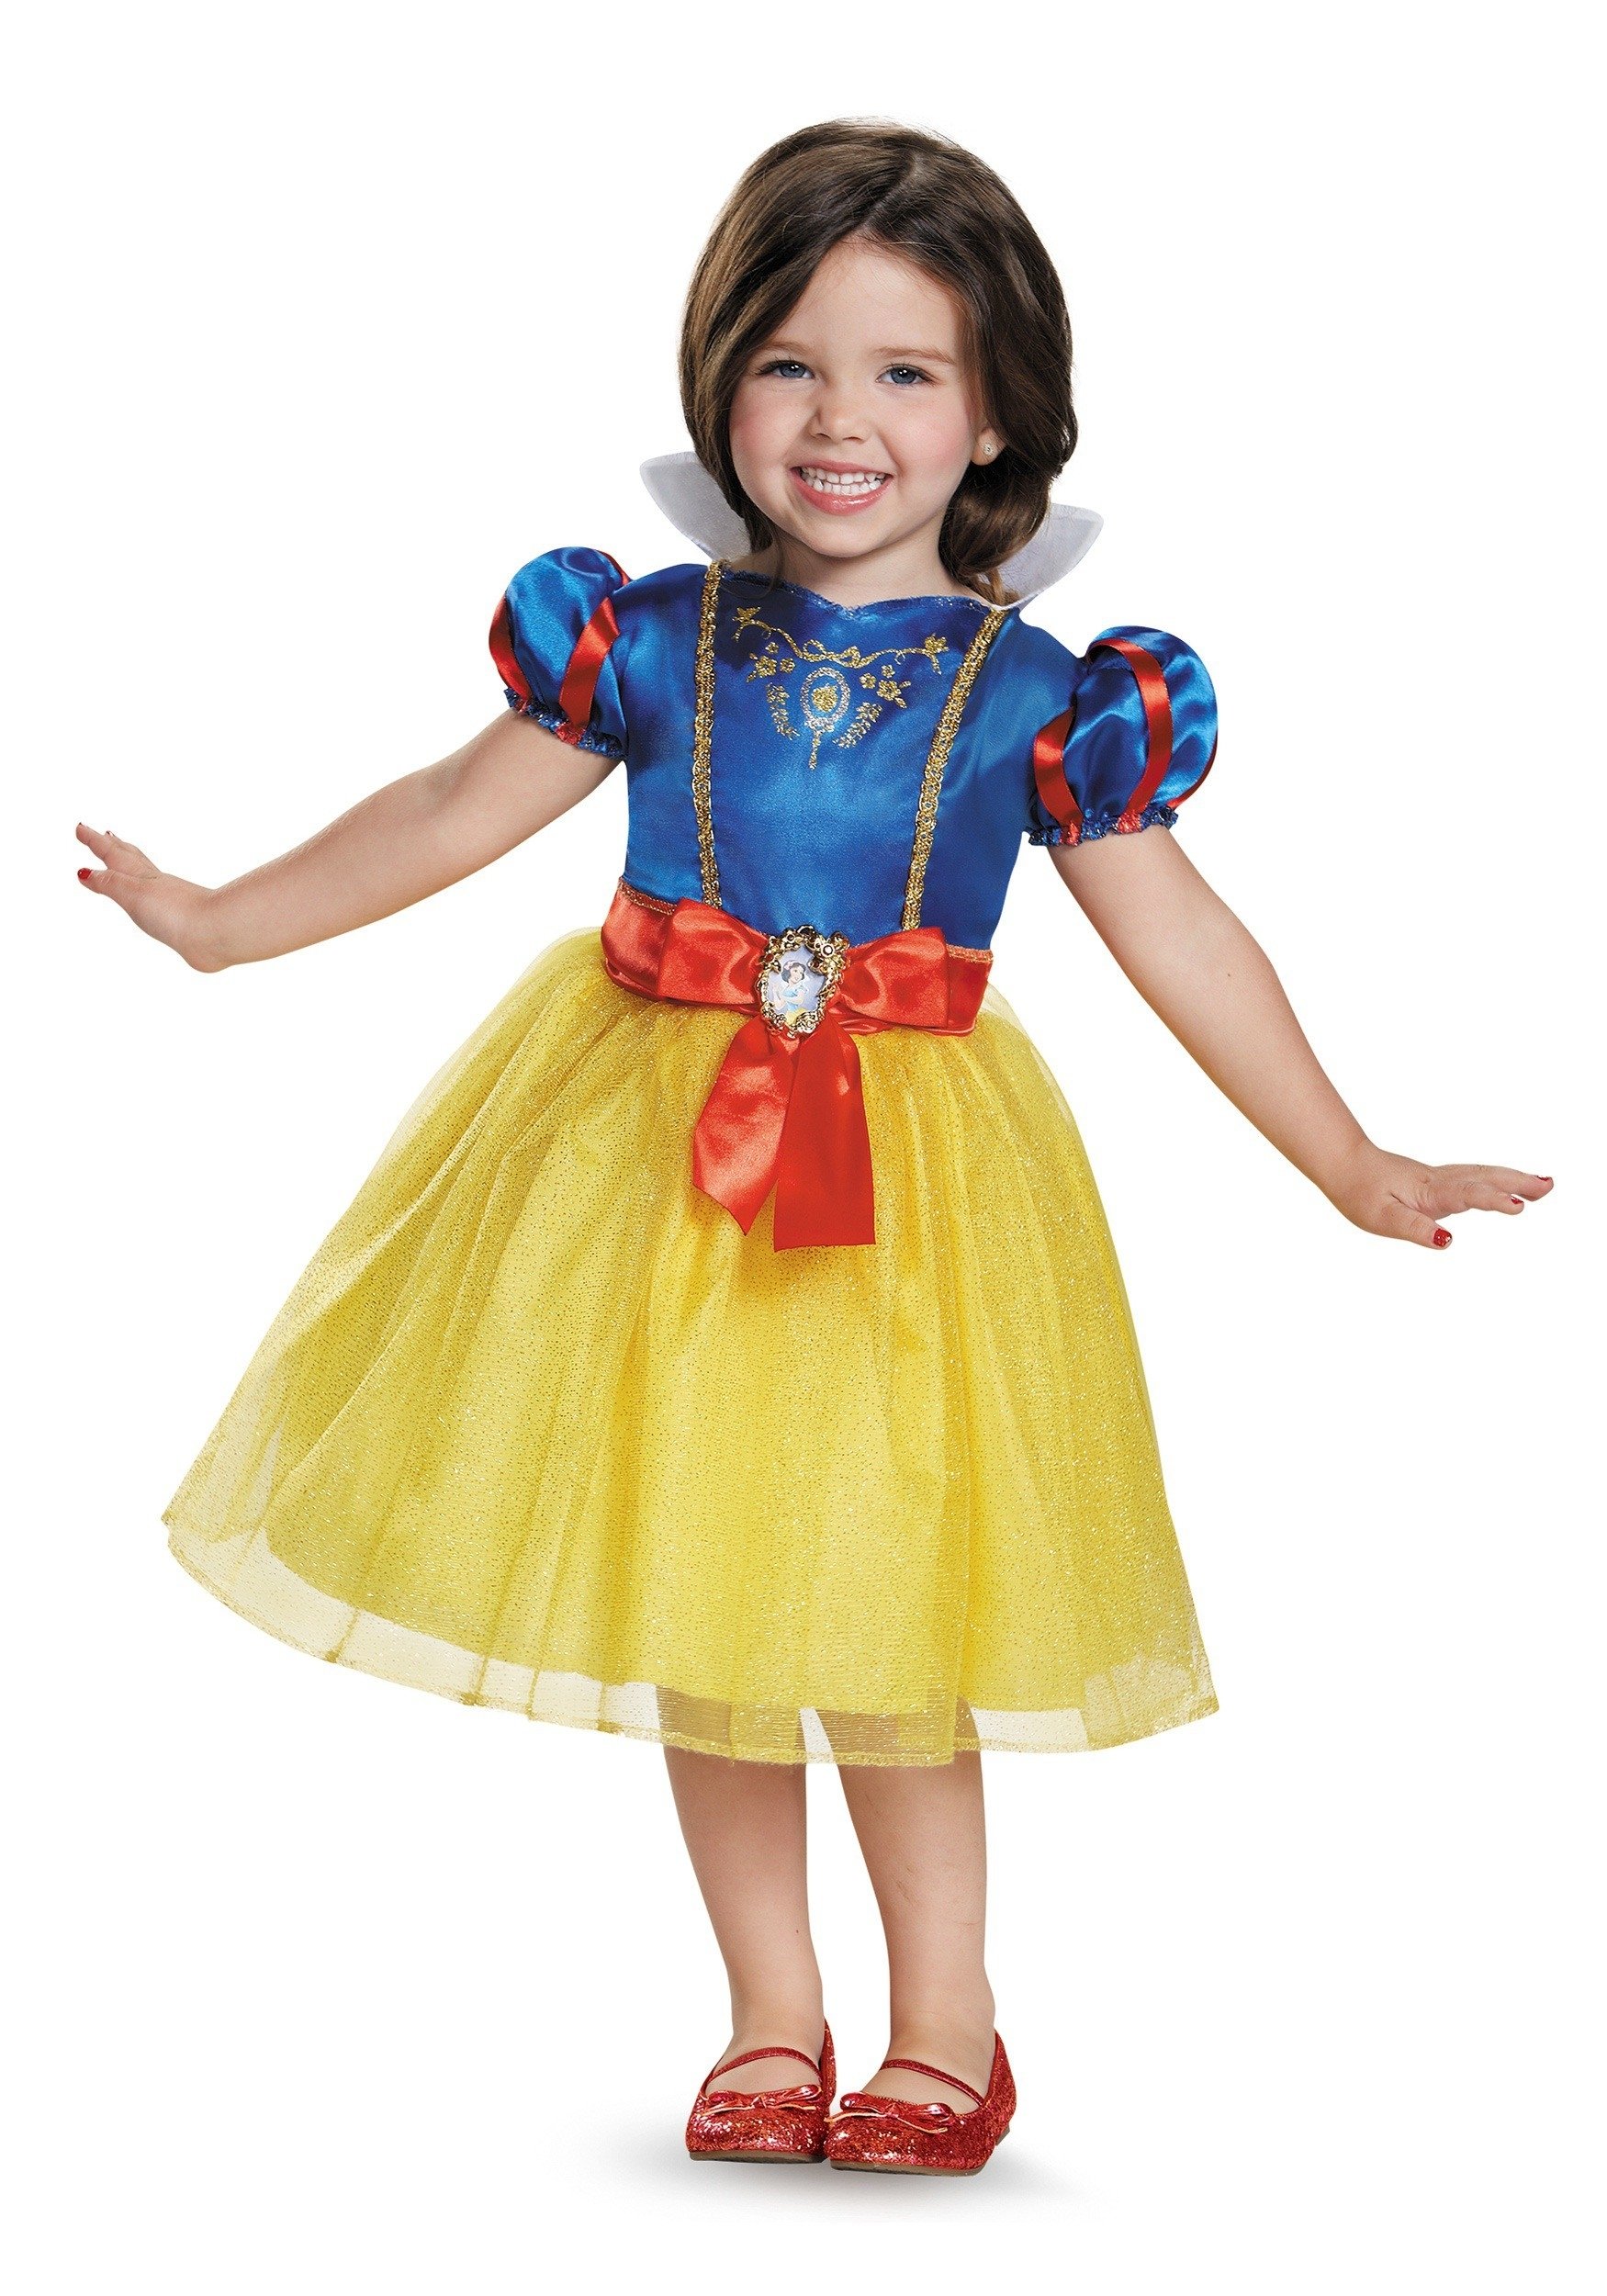 10 Most Recommended Toddler Girl Halloween Costume Ideas toddler halloween costumes halloweencostumes 2022